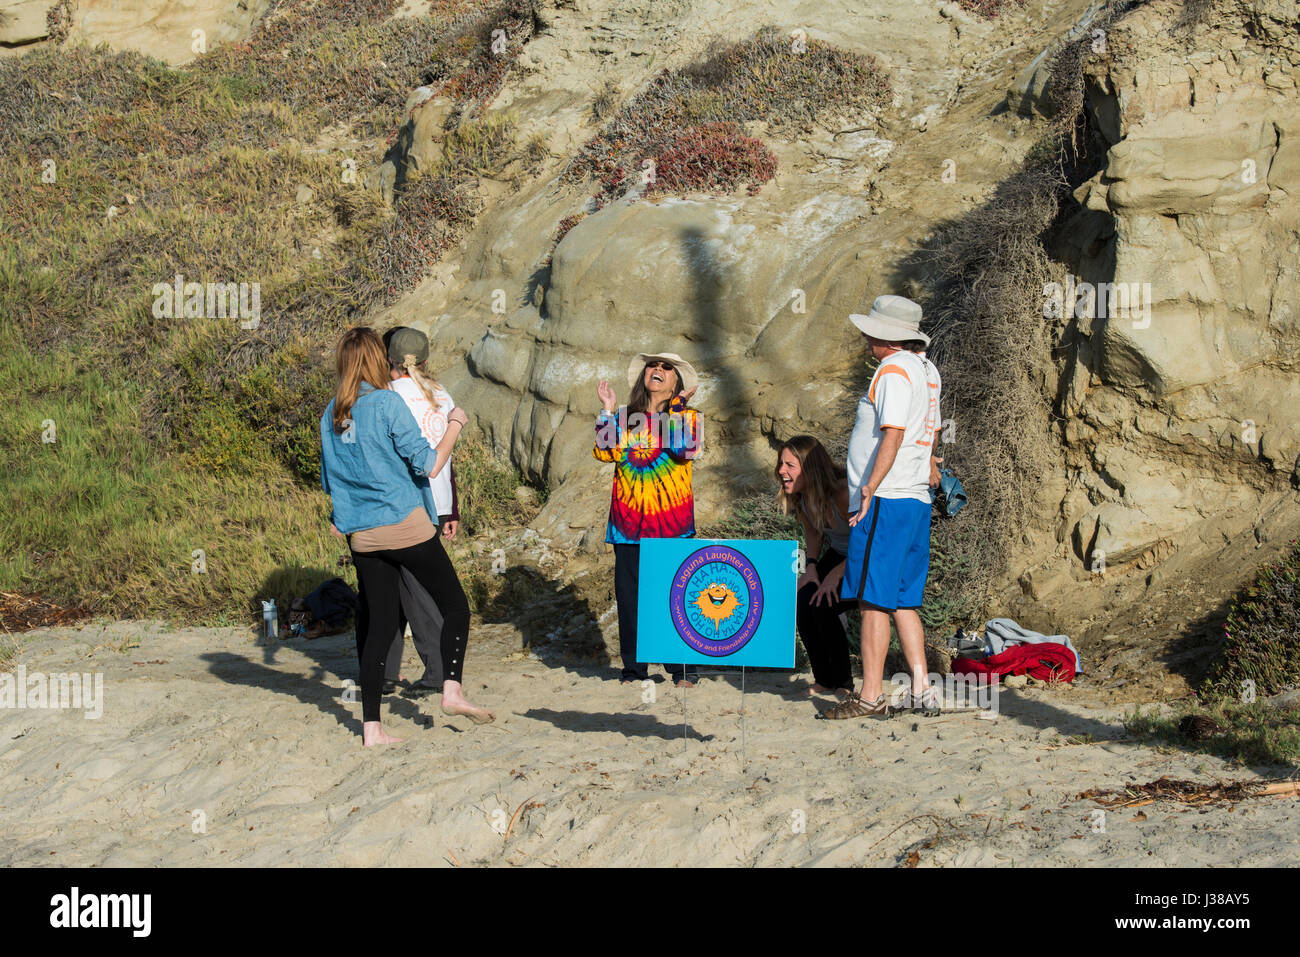 Laguna Beach, California.  Laguna Laughter Club. The Laguna Laughter Club is a group of people gathering to practice laughter as a form of exercise. Stock Photo